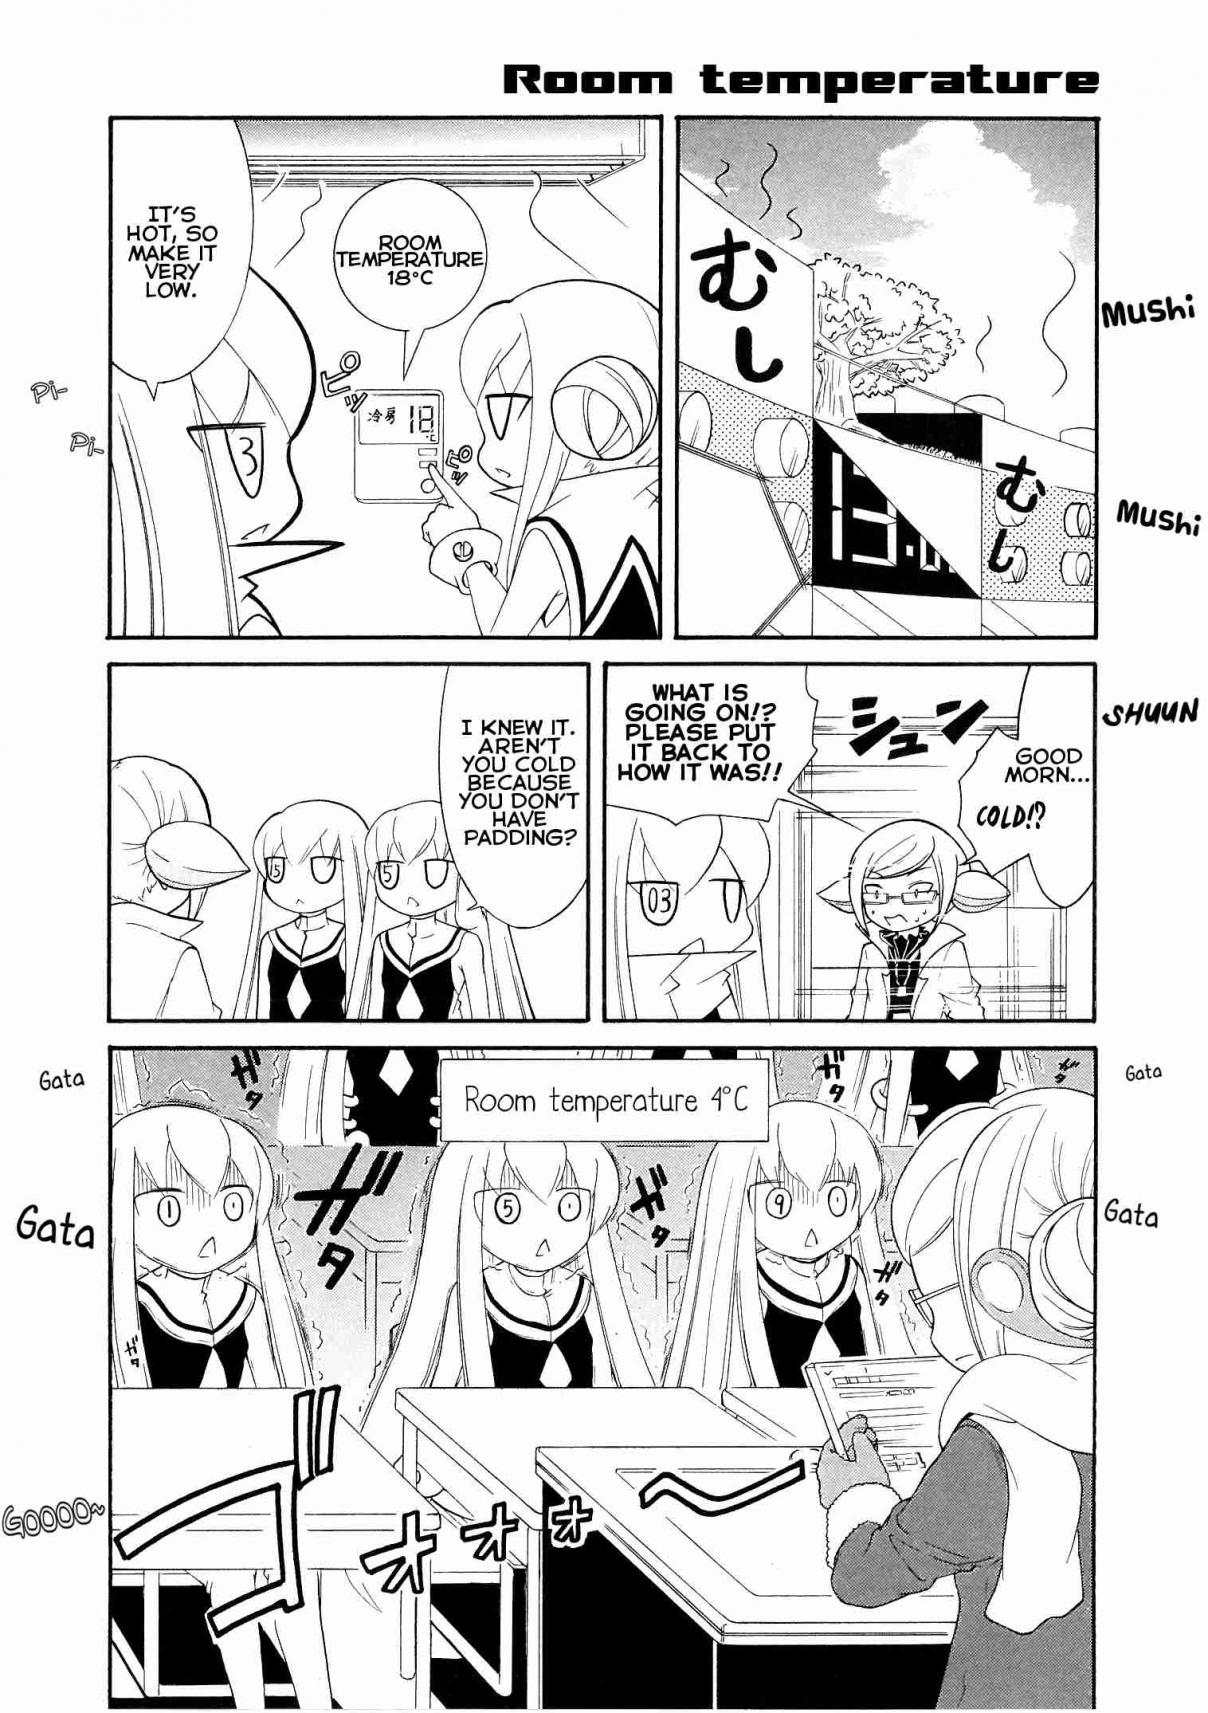 Number Girl Vol. 2 Ch. 20